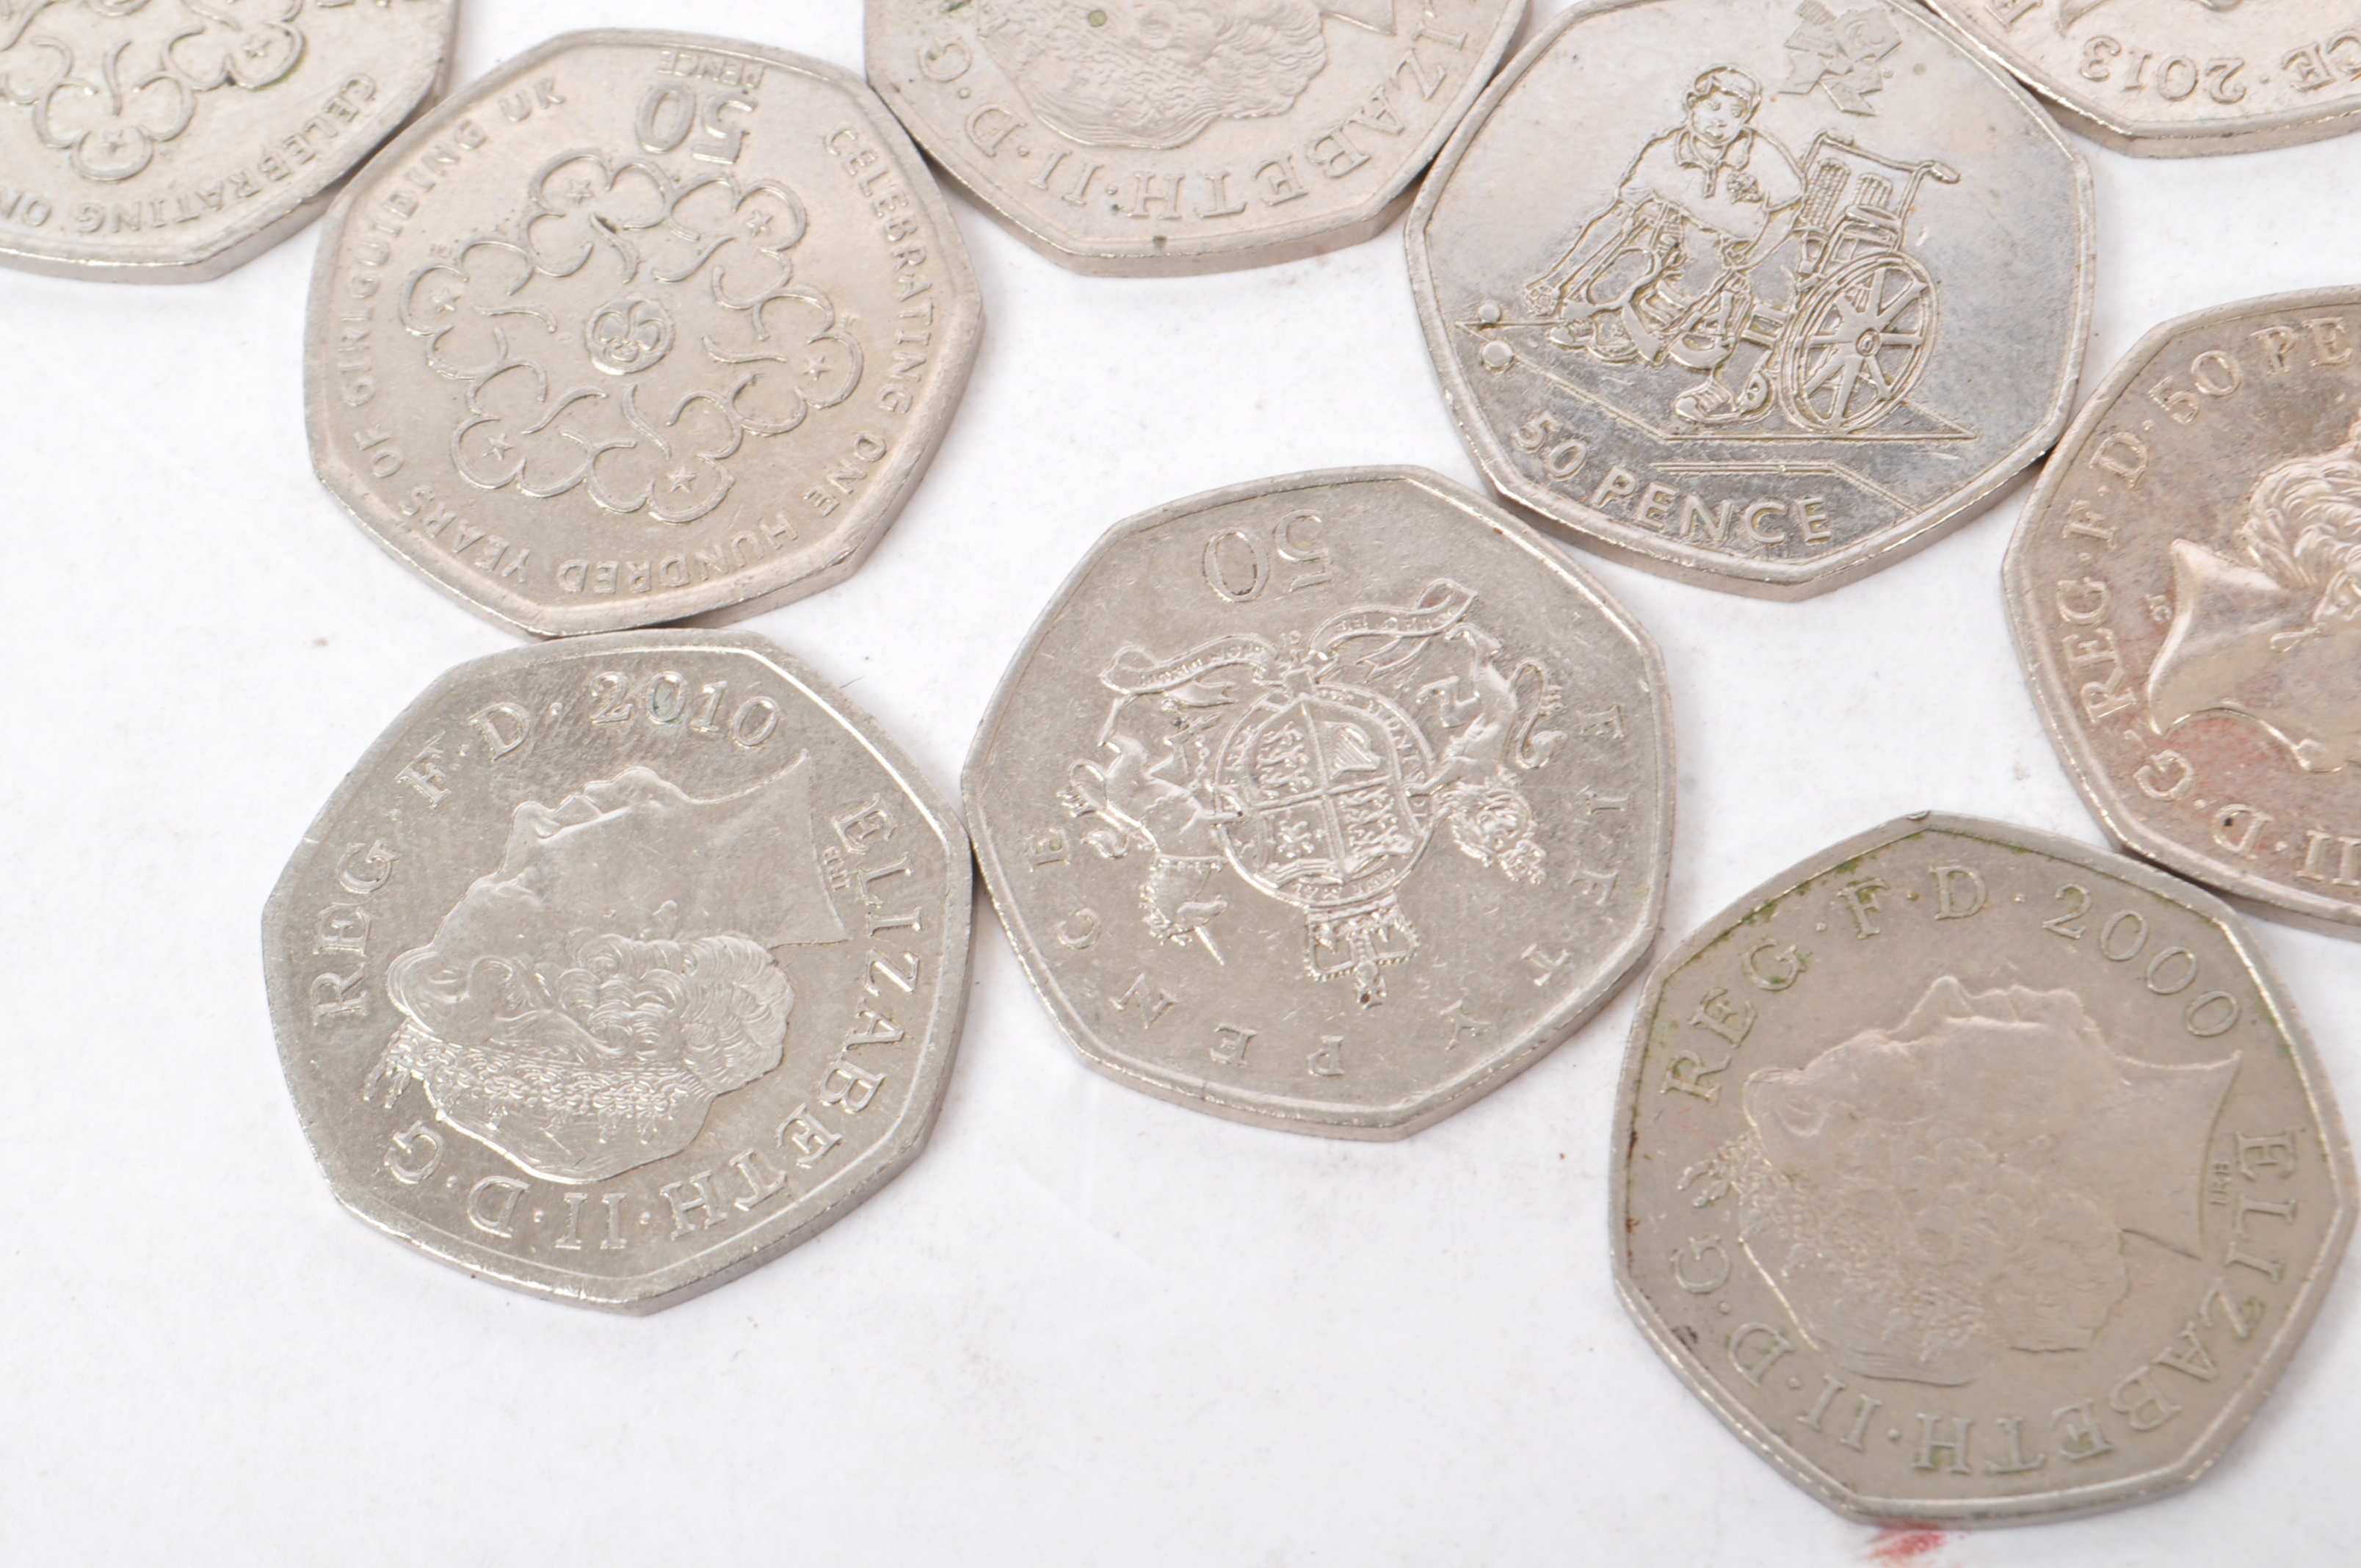 UNITED KINGDOM - COLLECTION OF LIMITED EDITION 50 PENCE COINS - Image 9 of 10